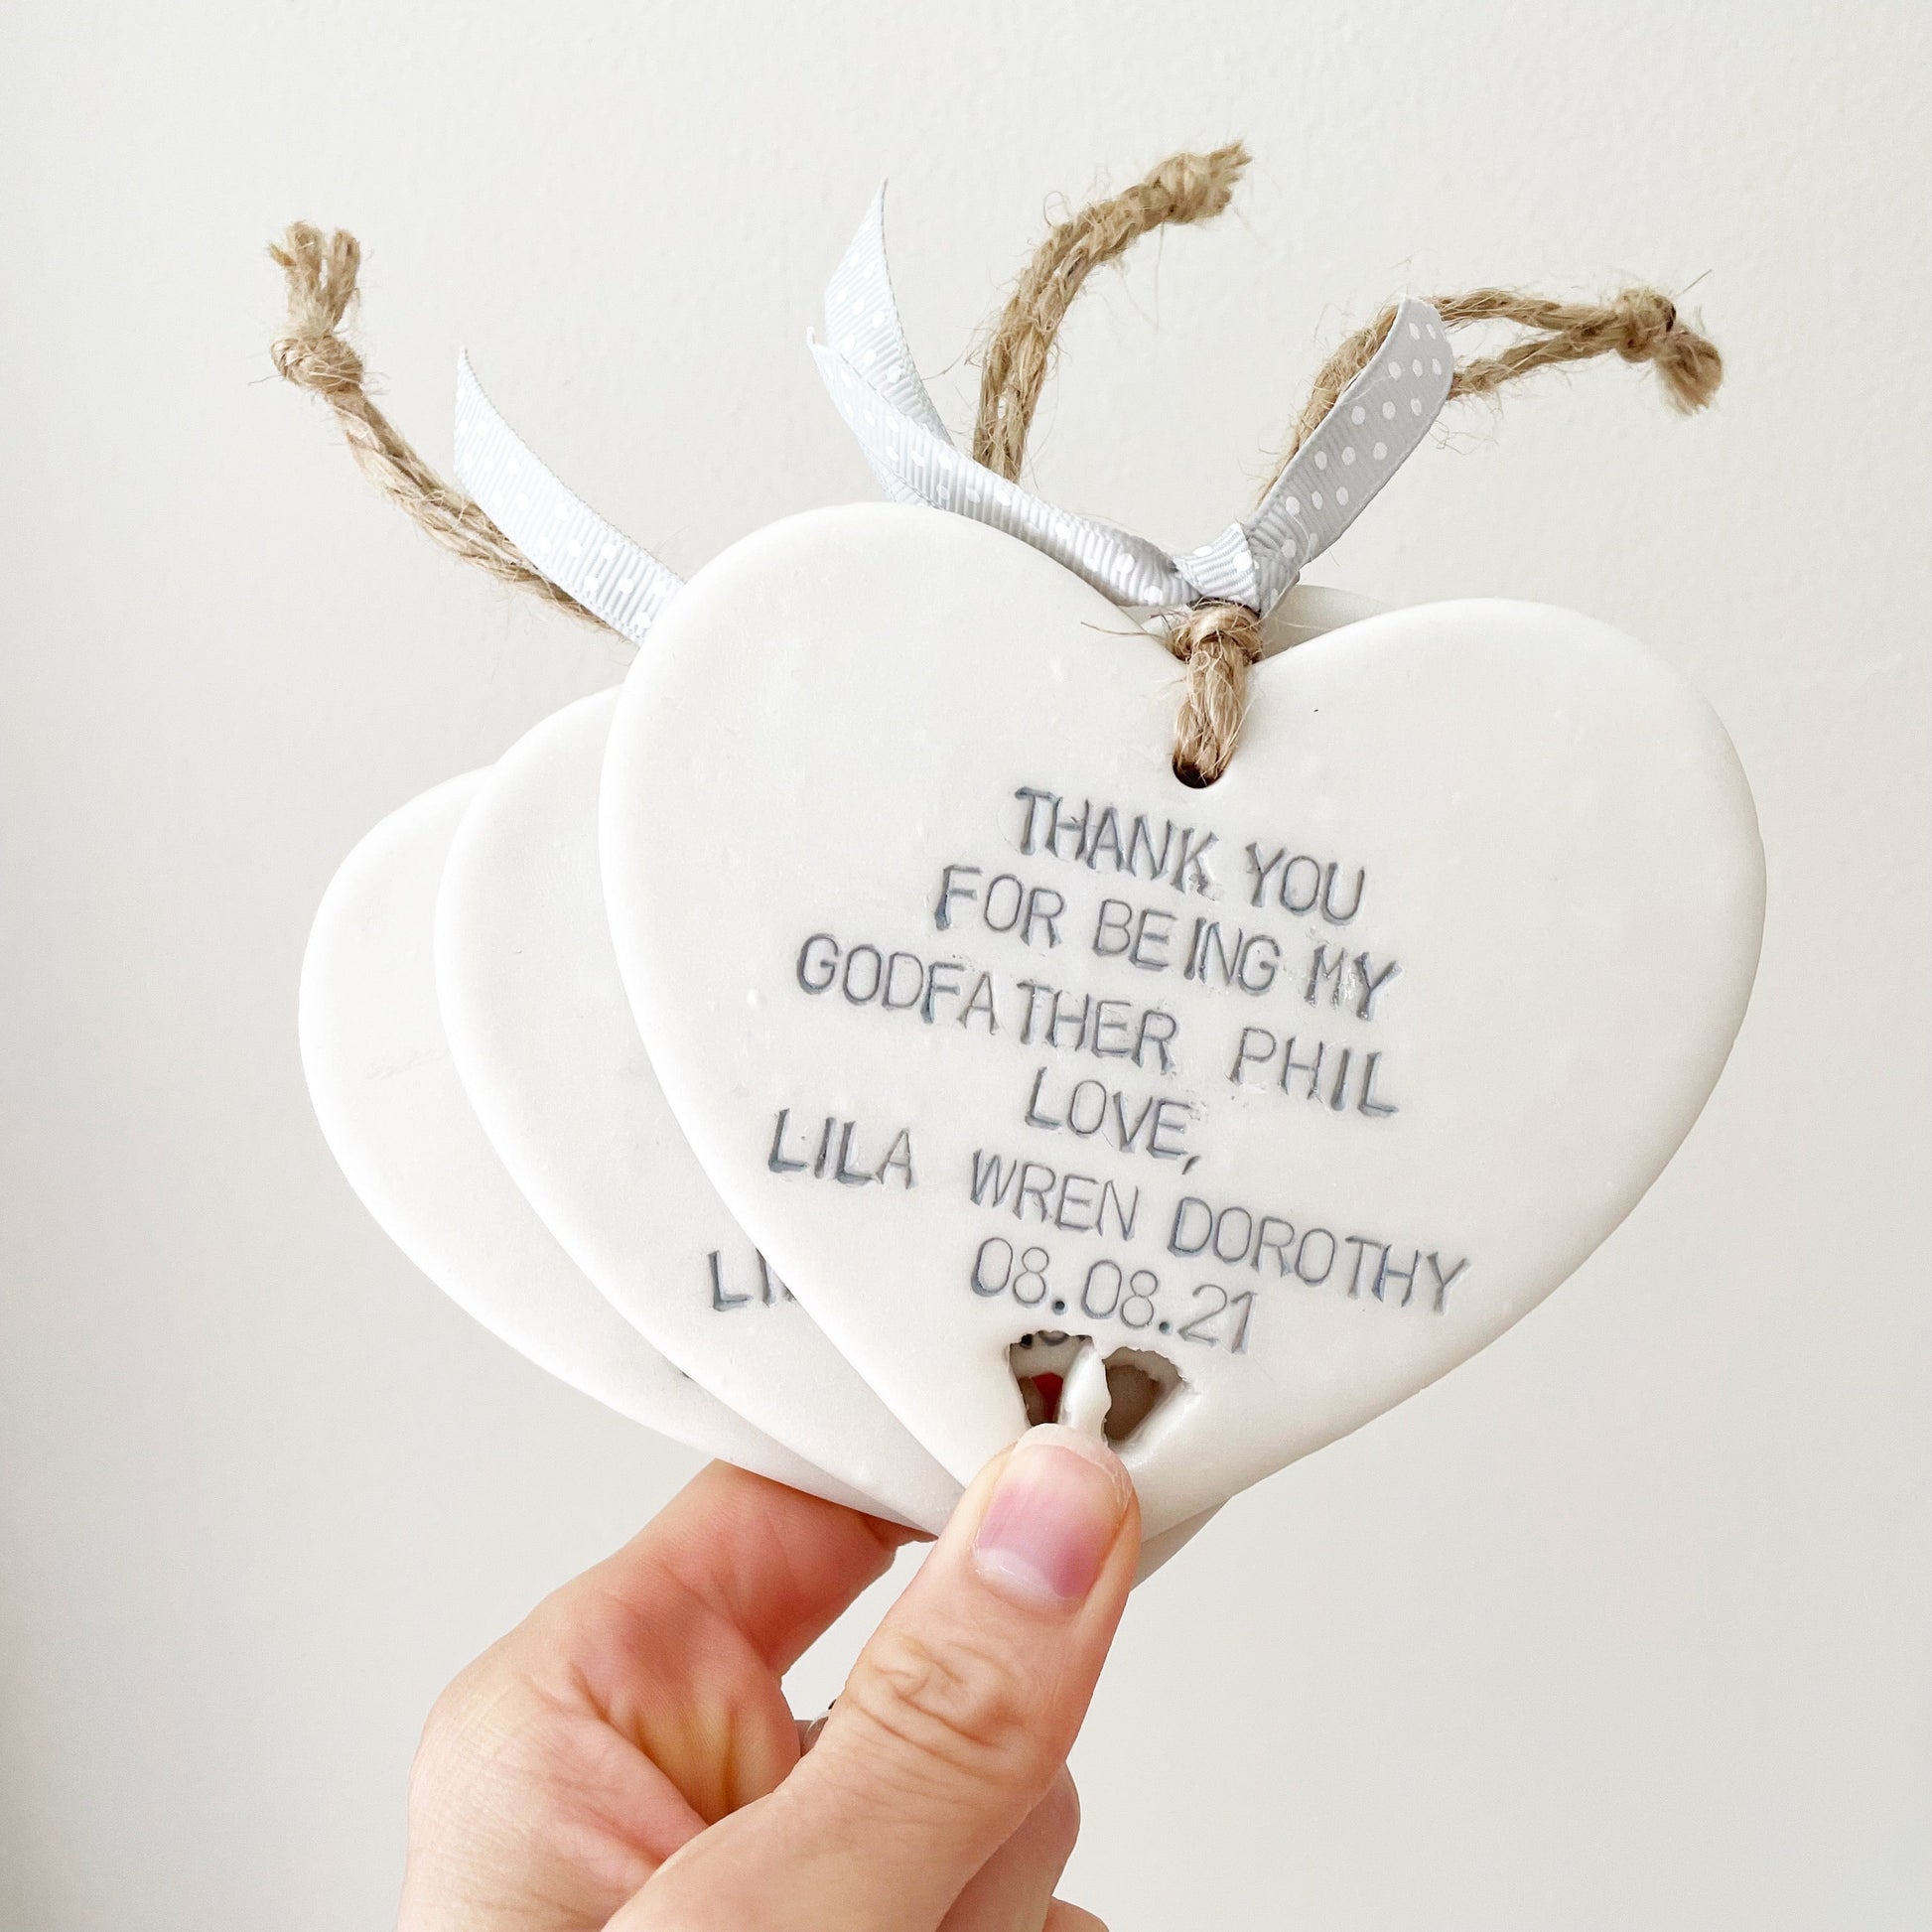 Personalised Godfather gift, 3 pearlised white clay hanging hearts with baby feet cut out of the bottom, the heart is personalised with THANK YOU FOR BEING MY GODFATHER PHIL LOVE, LILA WREN DOROTHY 08.08.21